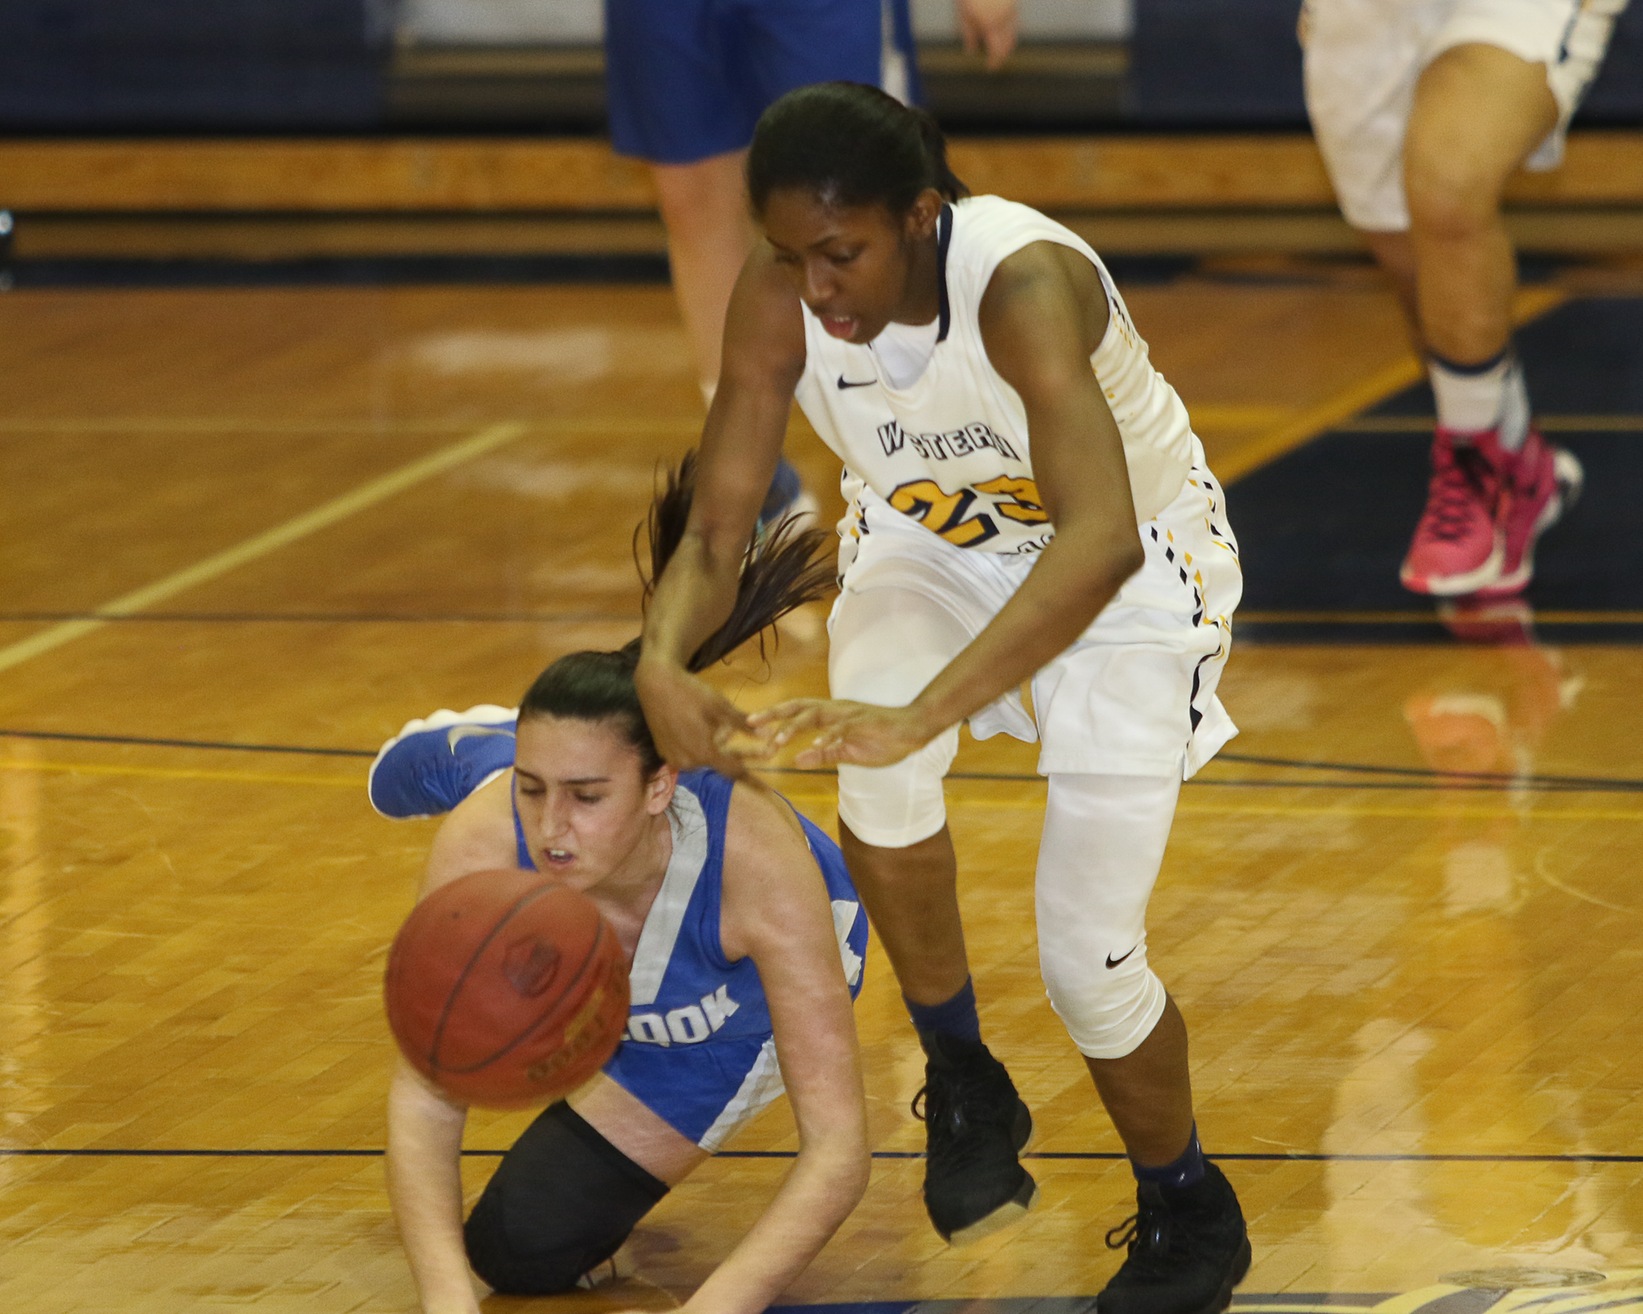 WNCC roll to 19th win over McCook 115-56